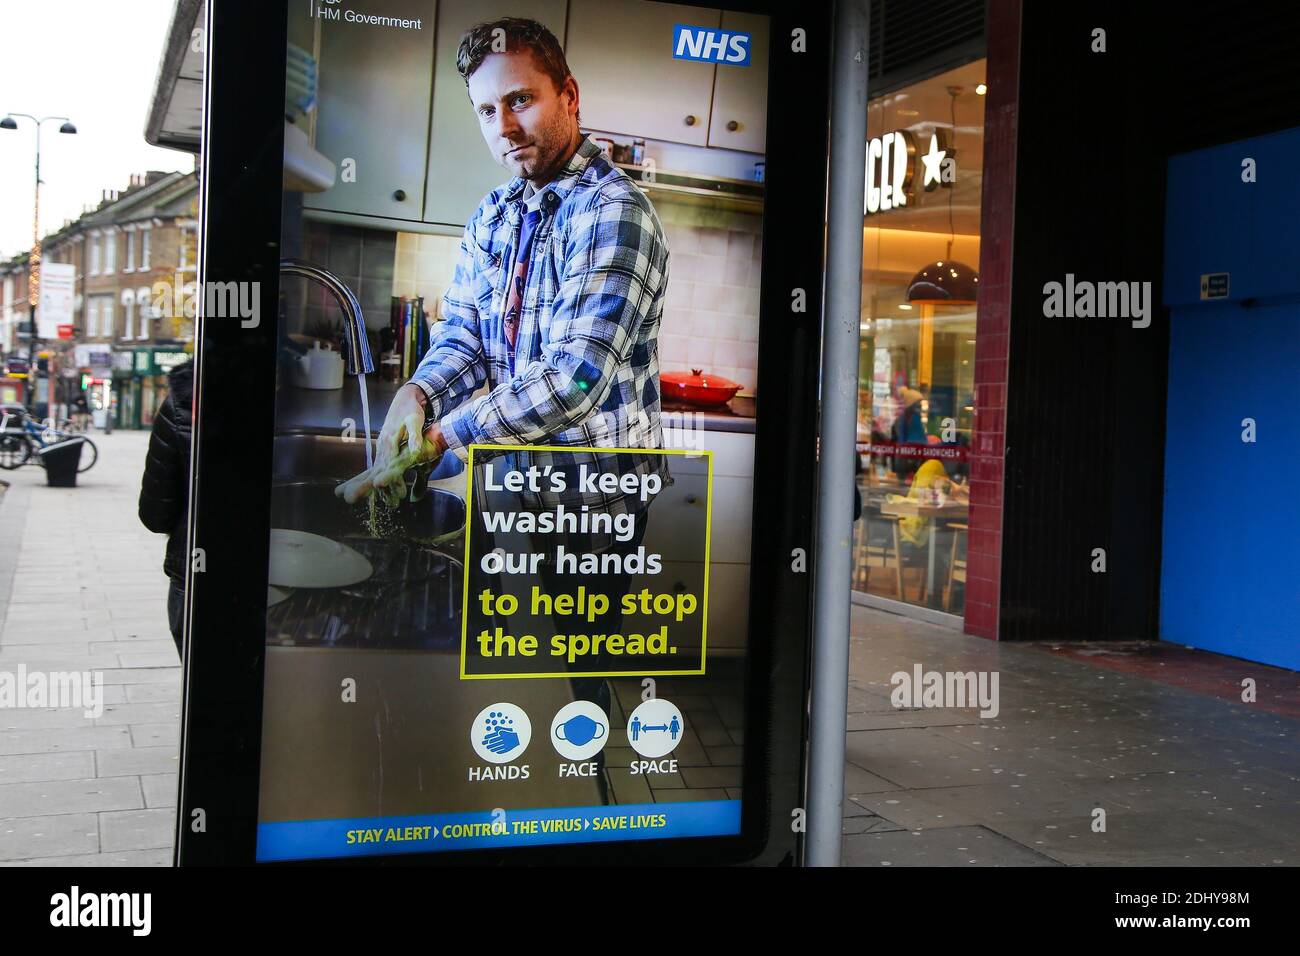 COIVD-19 public information campaign digital poster seen on display in London. Stock Photo